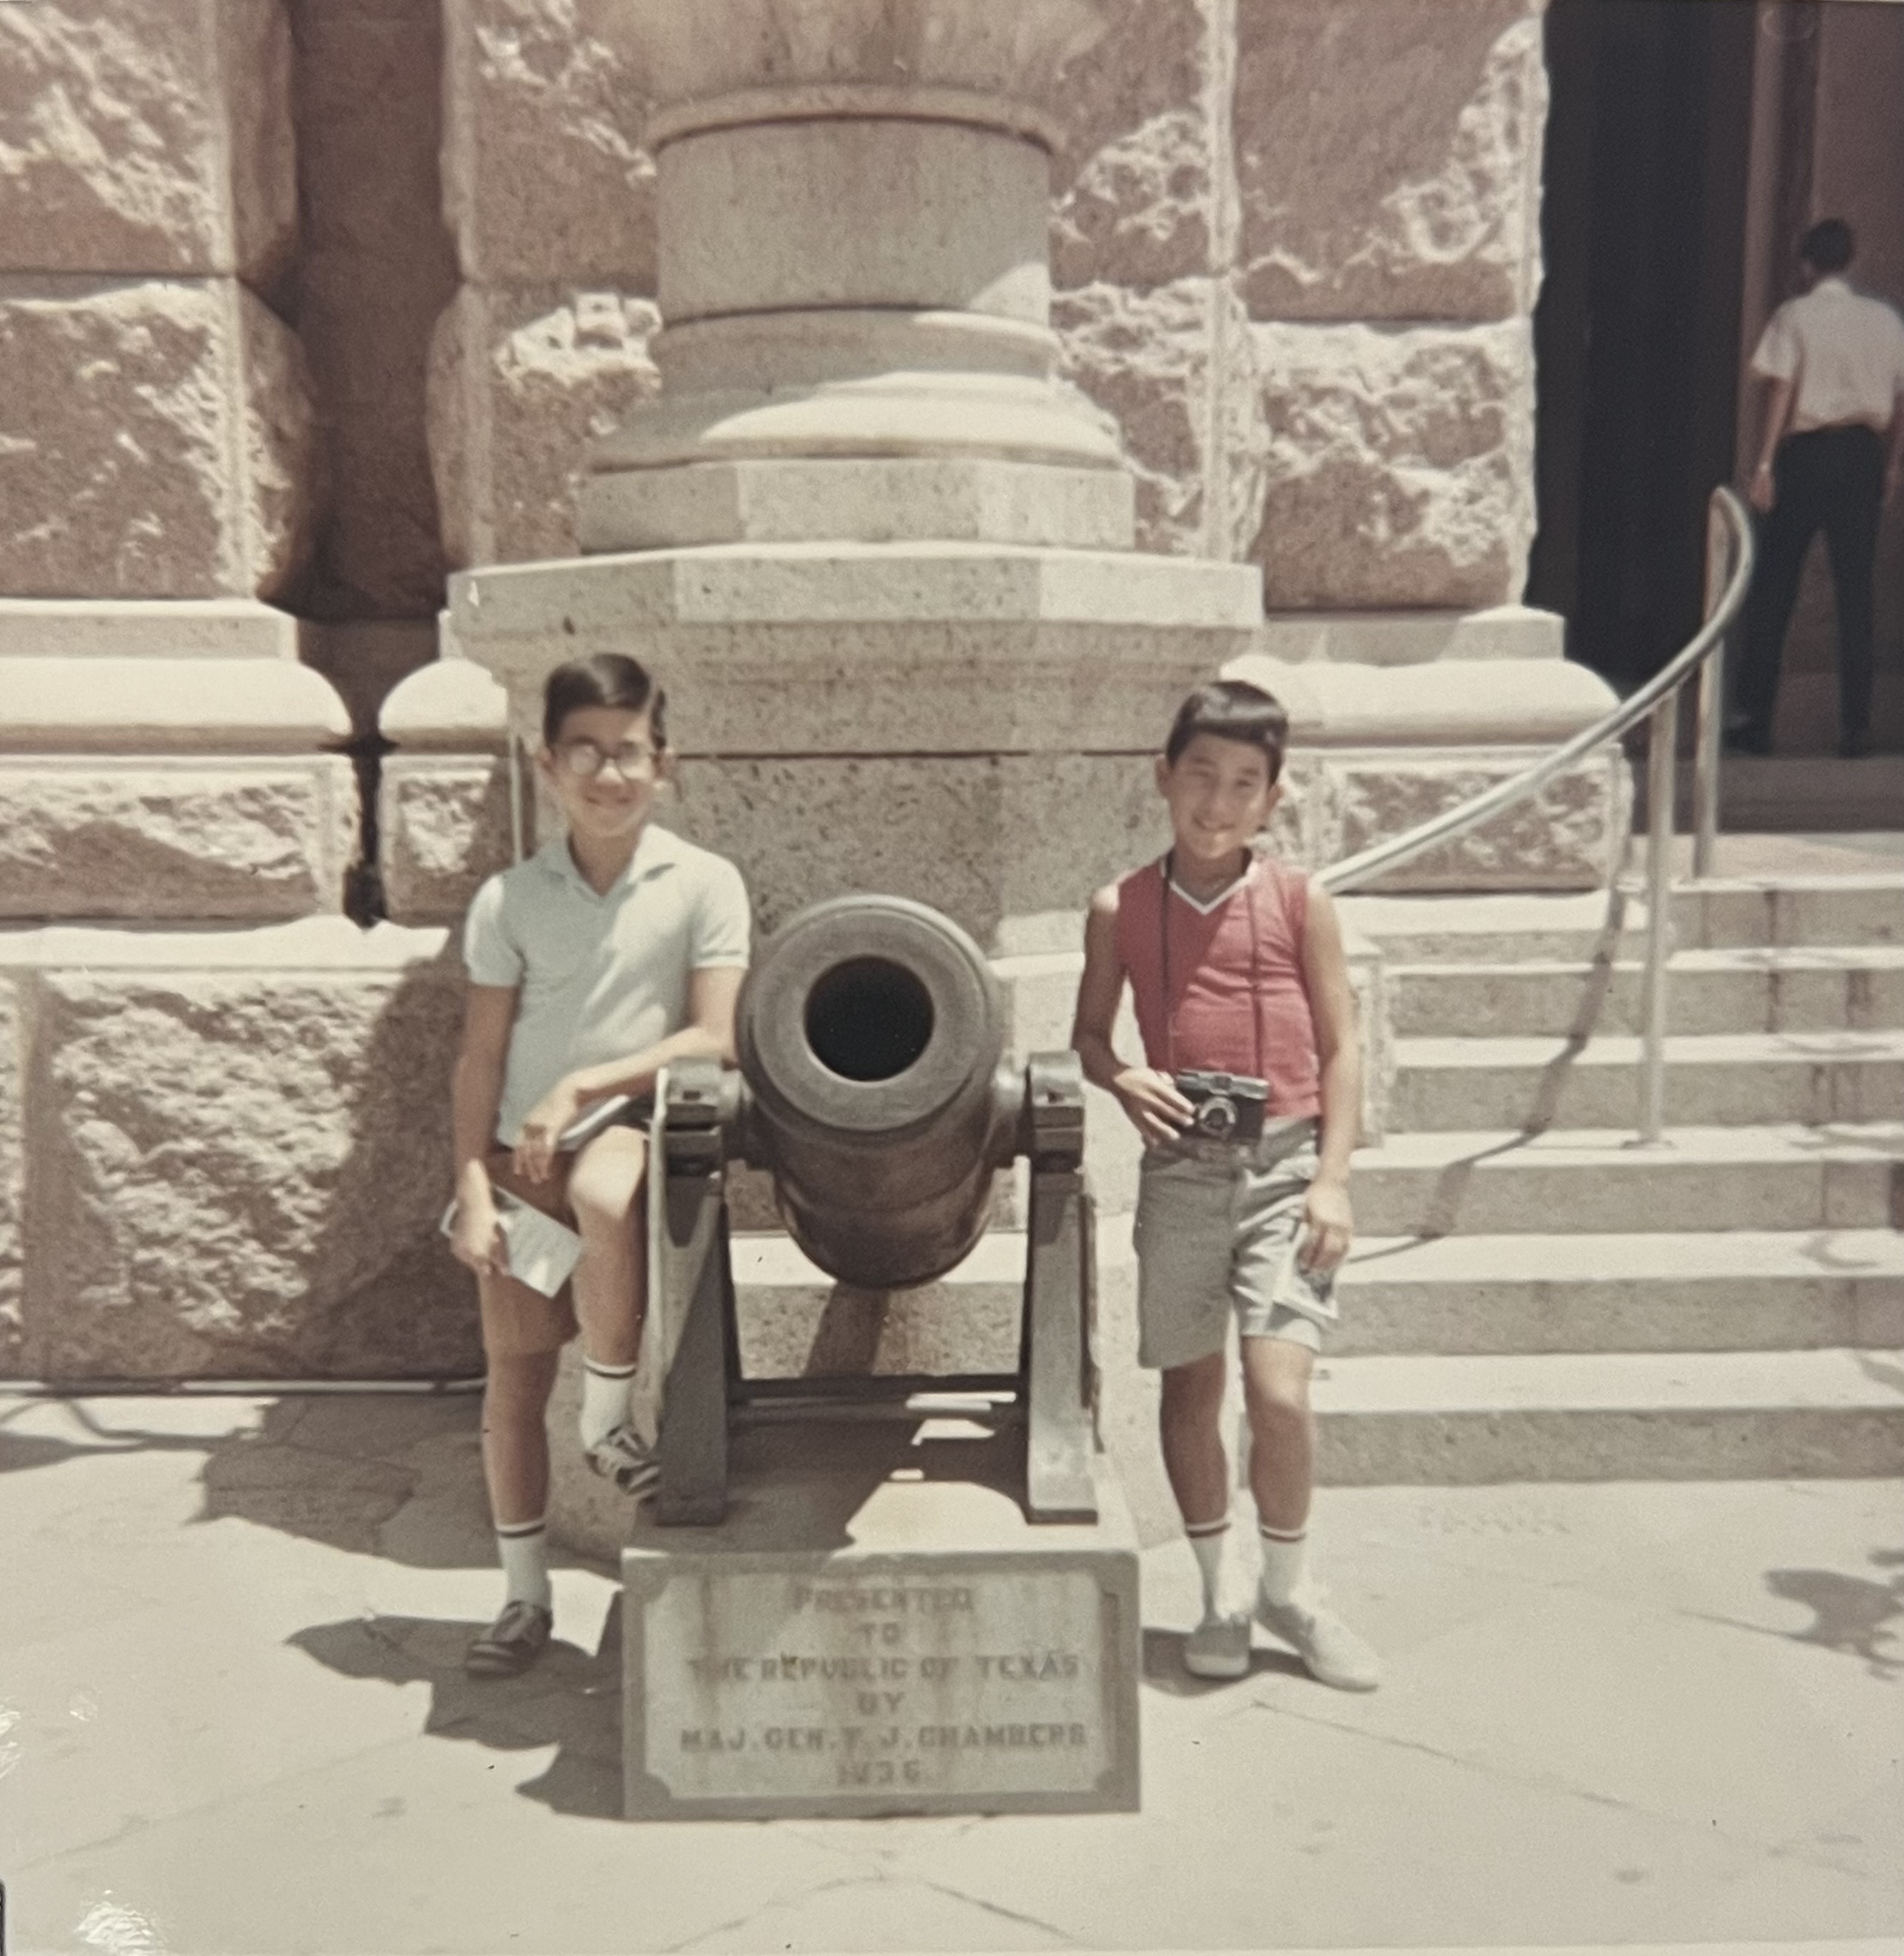 Todd and Glenn Hayataka posing in front of the Texas State Capitol, between them is a cannon with the text 'Presented to the Republic of Texas by Maj. Gen. T. J. Chambers 1836'. 